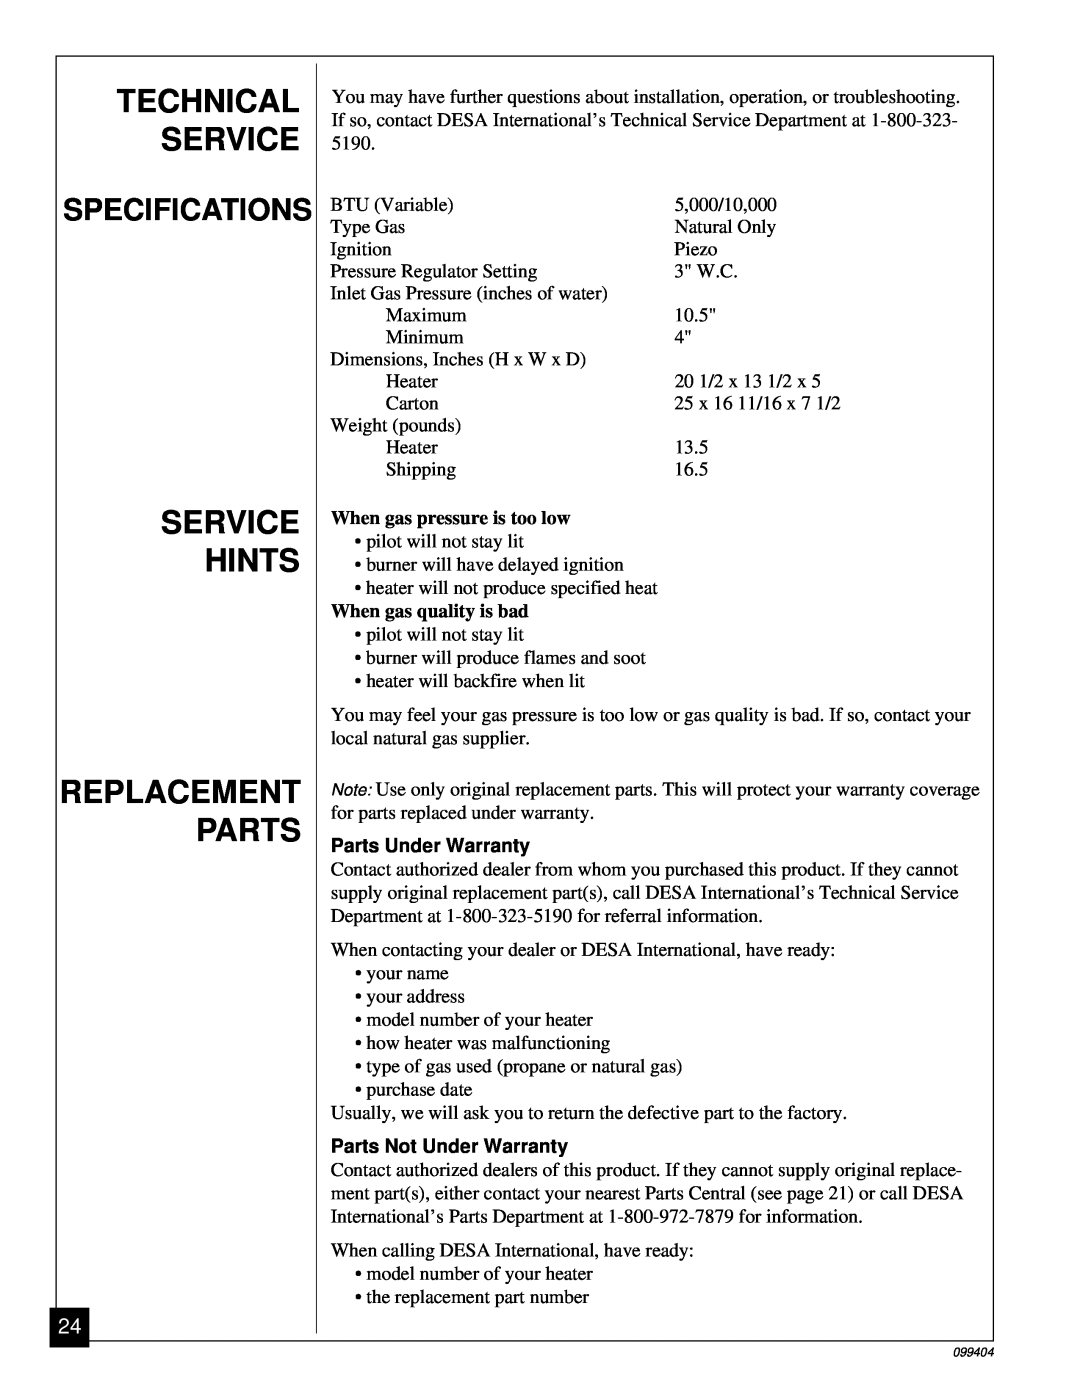 Desa CGN10 installation manual Technical Service, Service Hints Replacement Parts, Specifications, Parts Under Warranty 